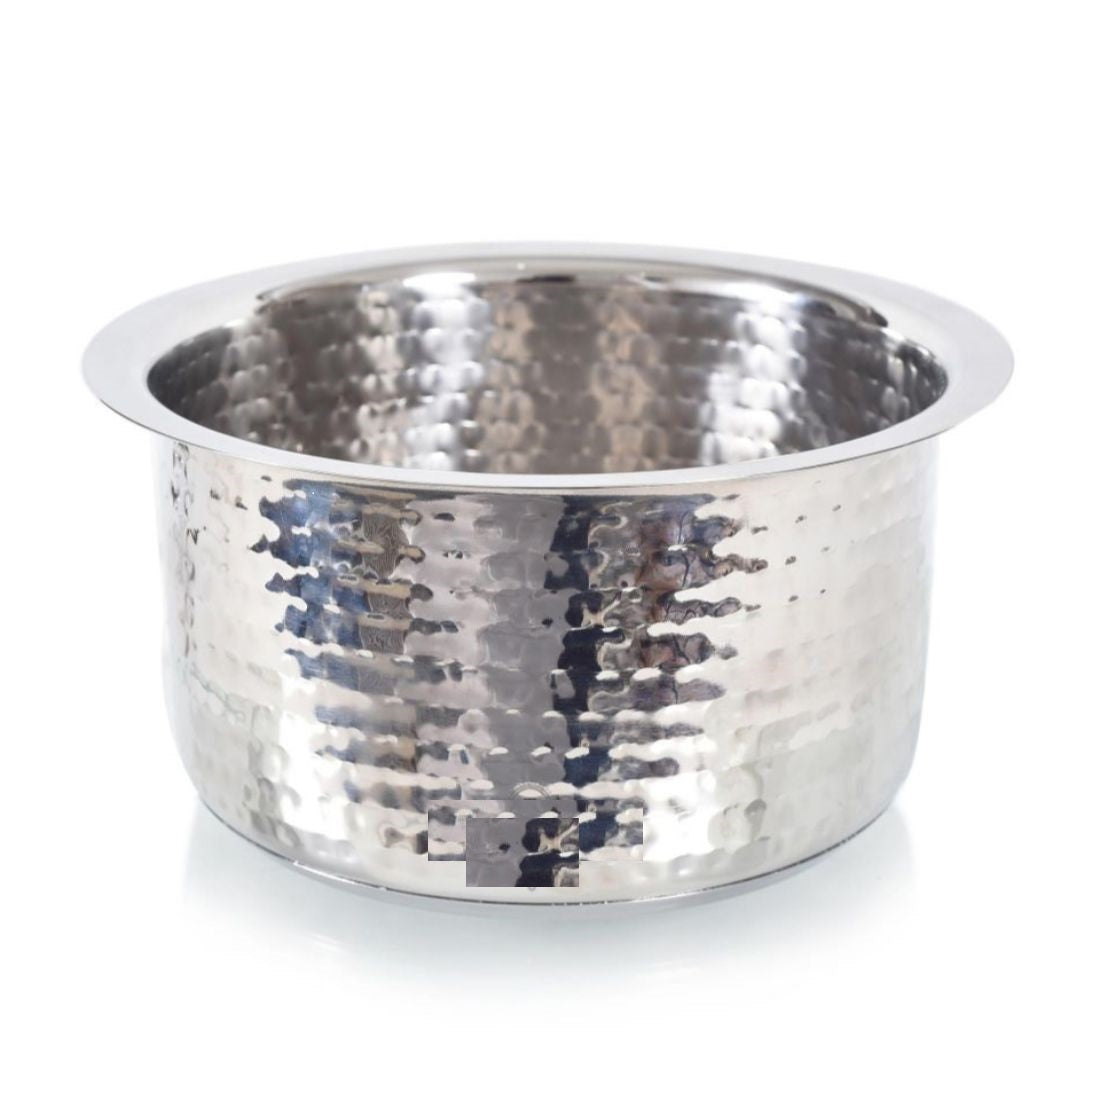 Aluminium Indian Hammered Deep Pot 4.7L with Lid No16 Round Heavy Duty 6255